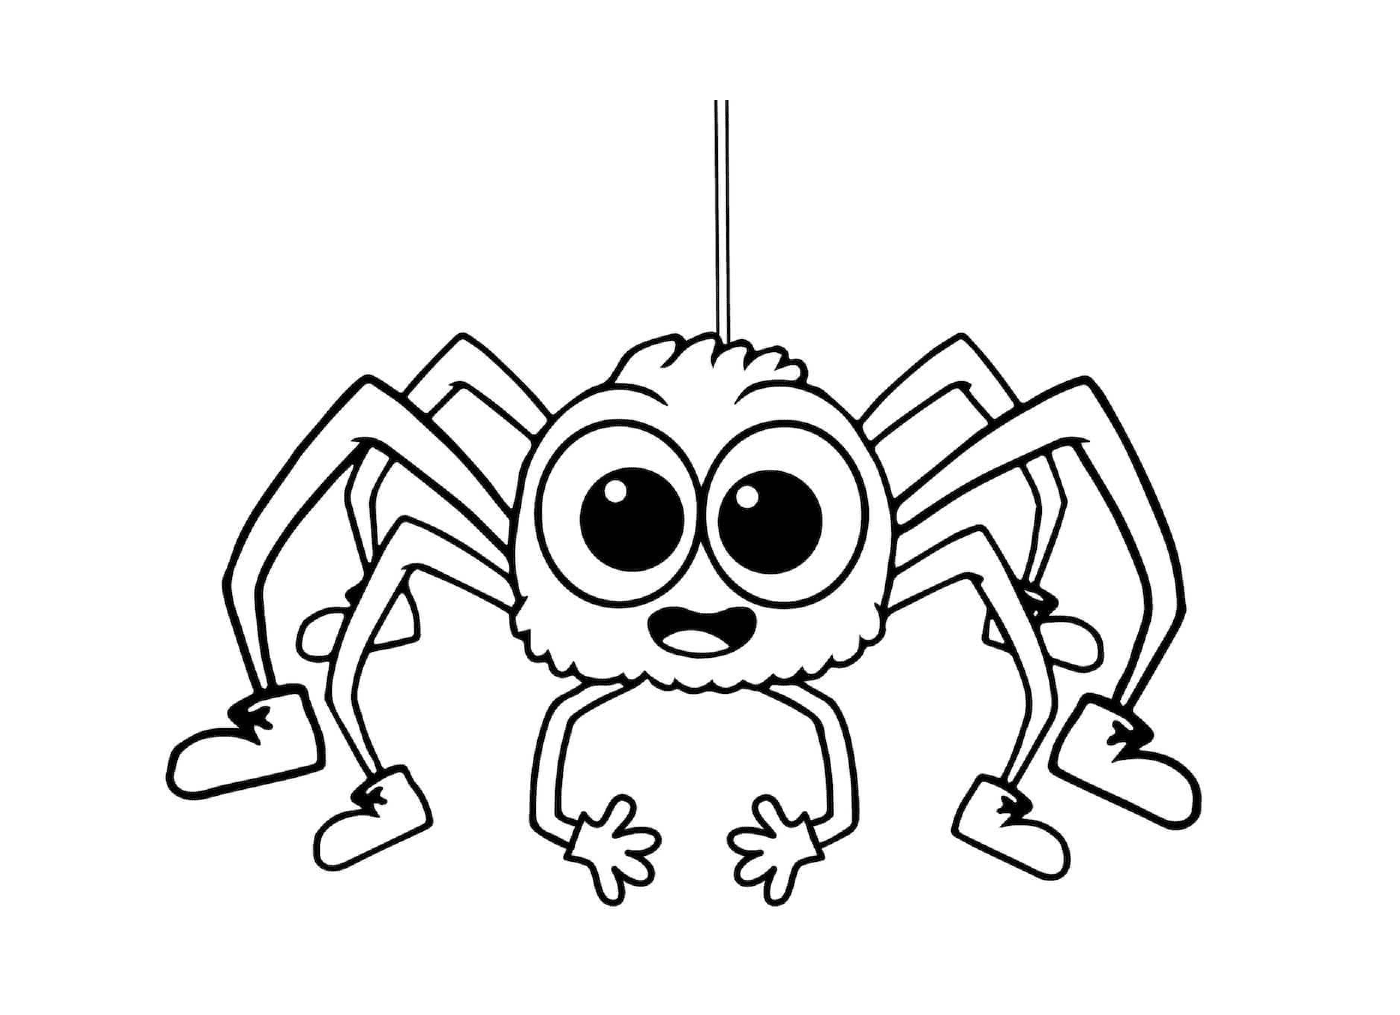  A simple and easy spider for children 